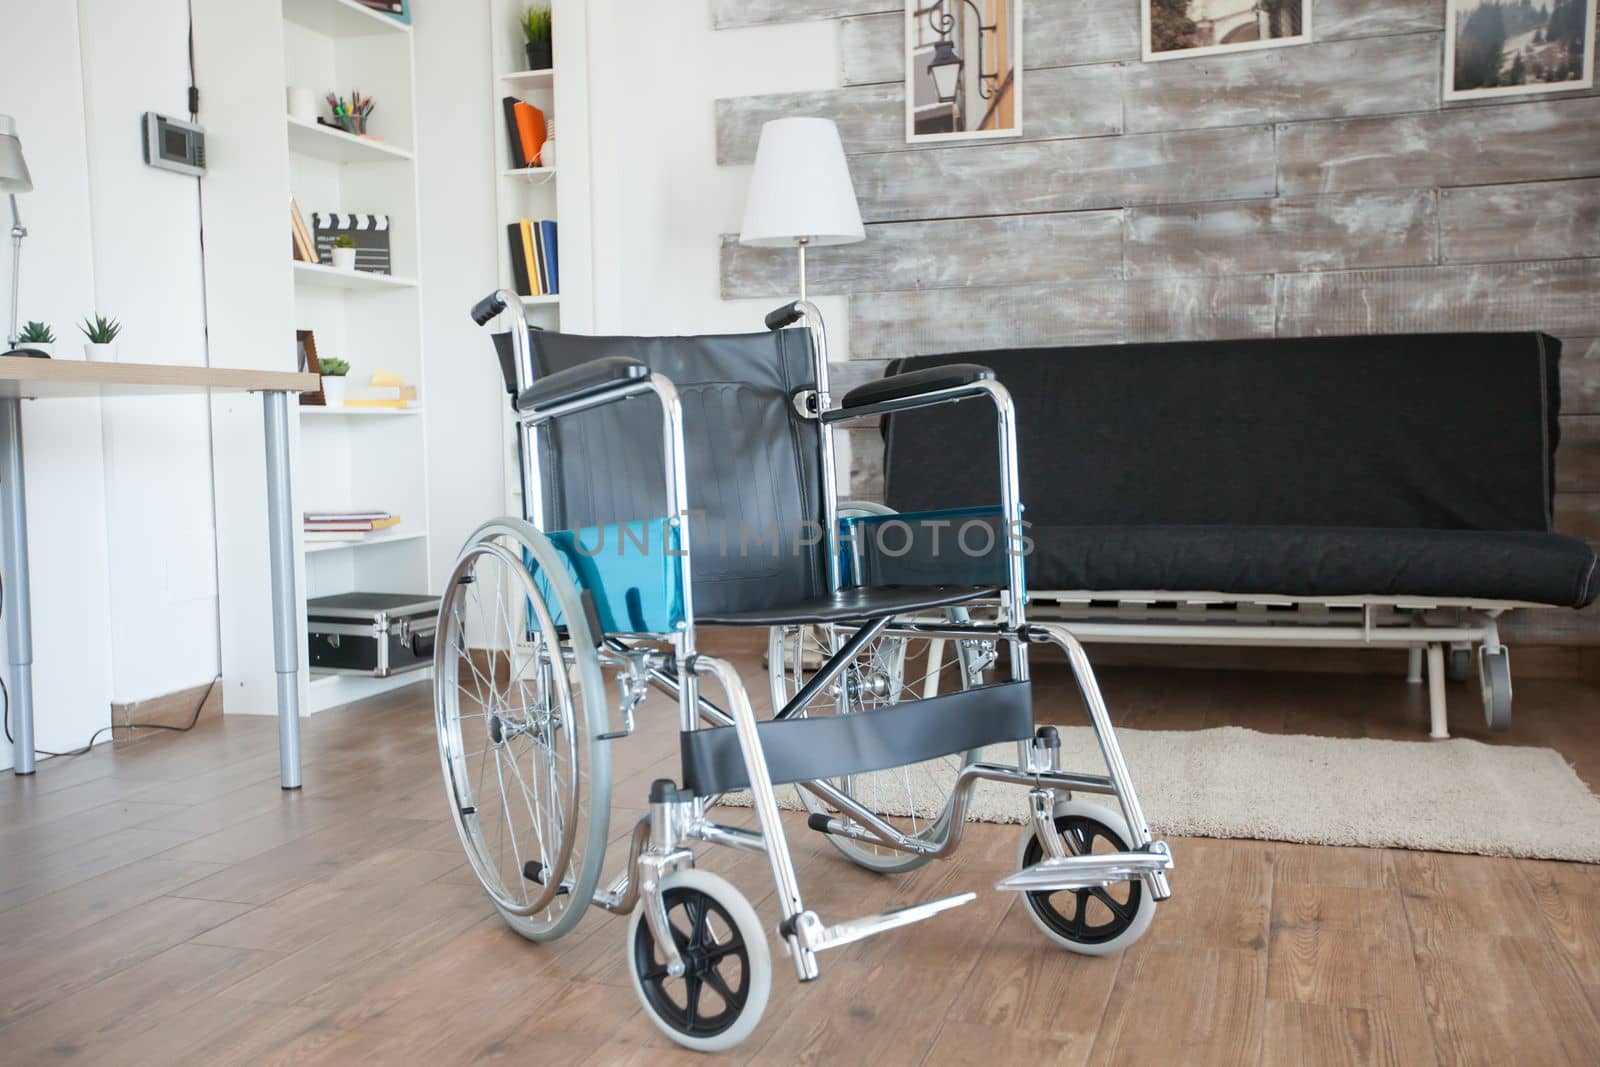 Wheelchair for transportation of patient with walking disability in nursing home. No patient in the room in the private nursing home. Therapy mobility support elderly and disabled walking disability impairment recovery paralysis invalid rehabilitation